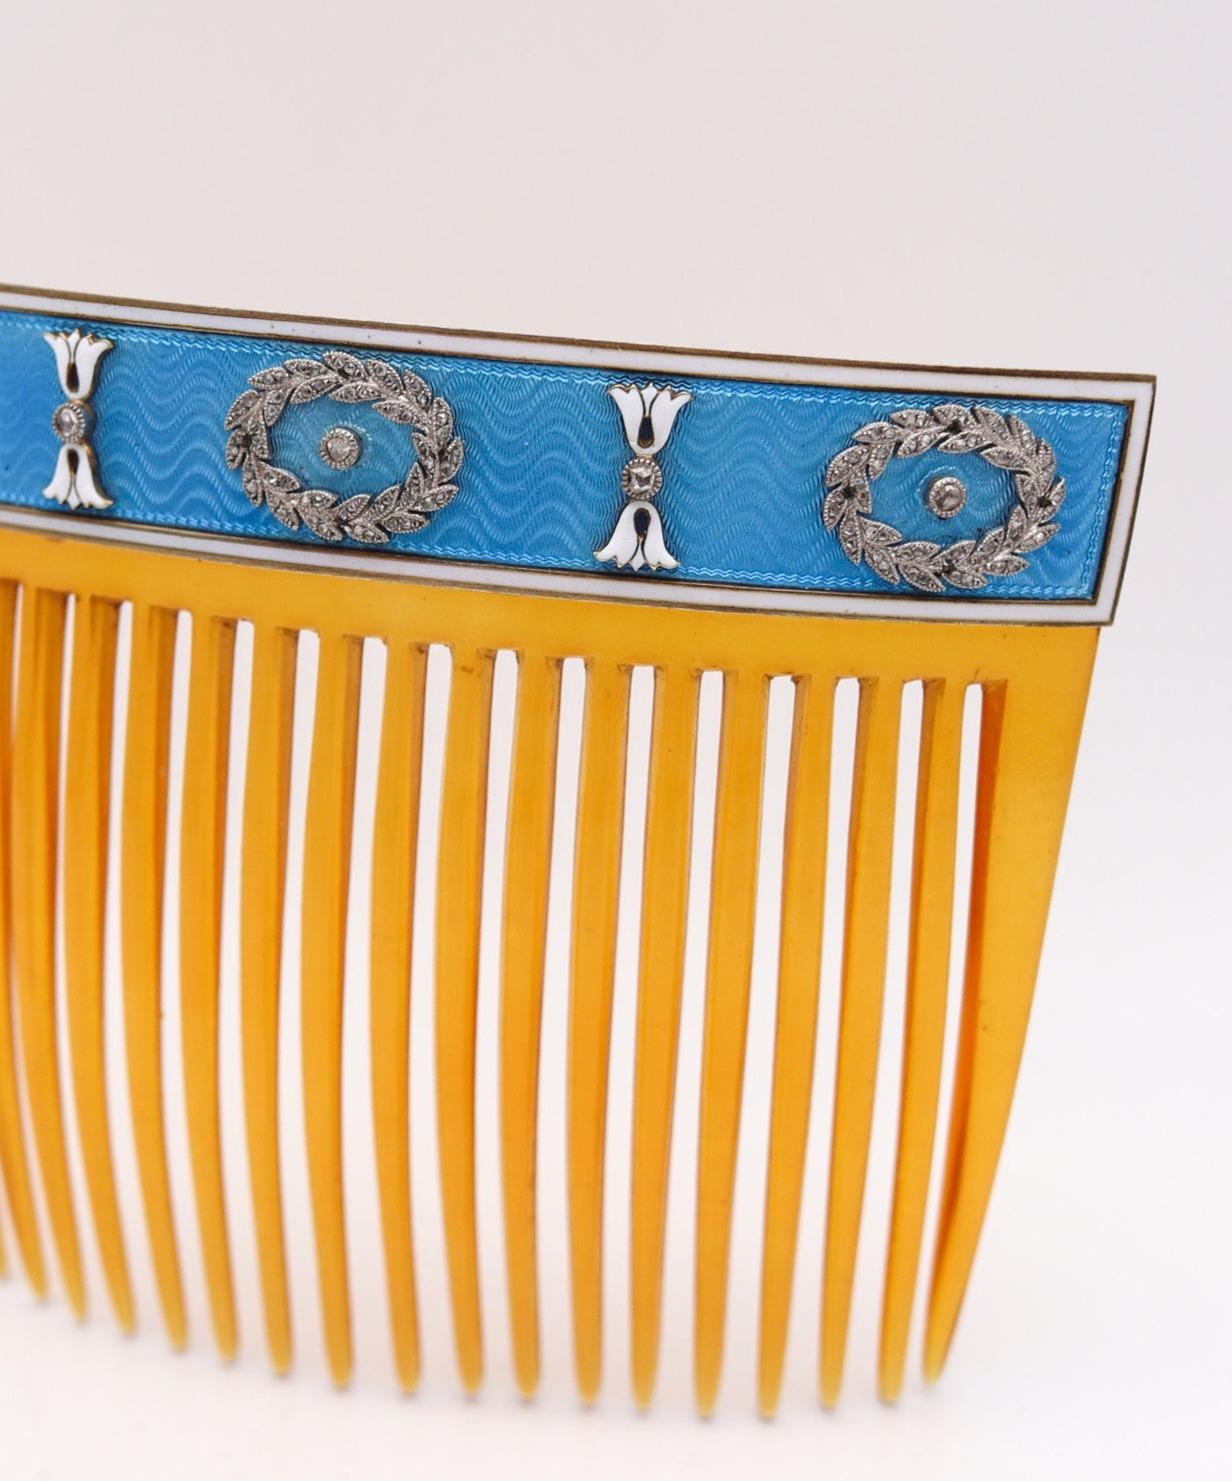 Cartier Paris 1900 Edwardian Enameled Hairs-Comb in 18Kt Gold With Diamonds For Sale 6